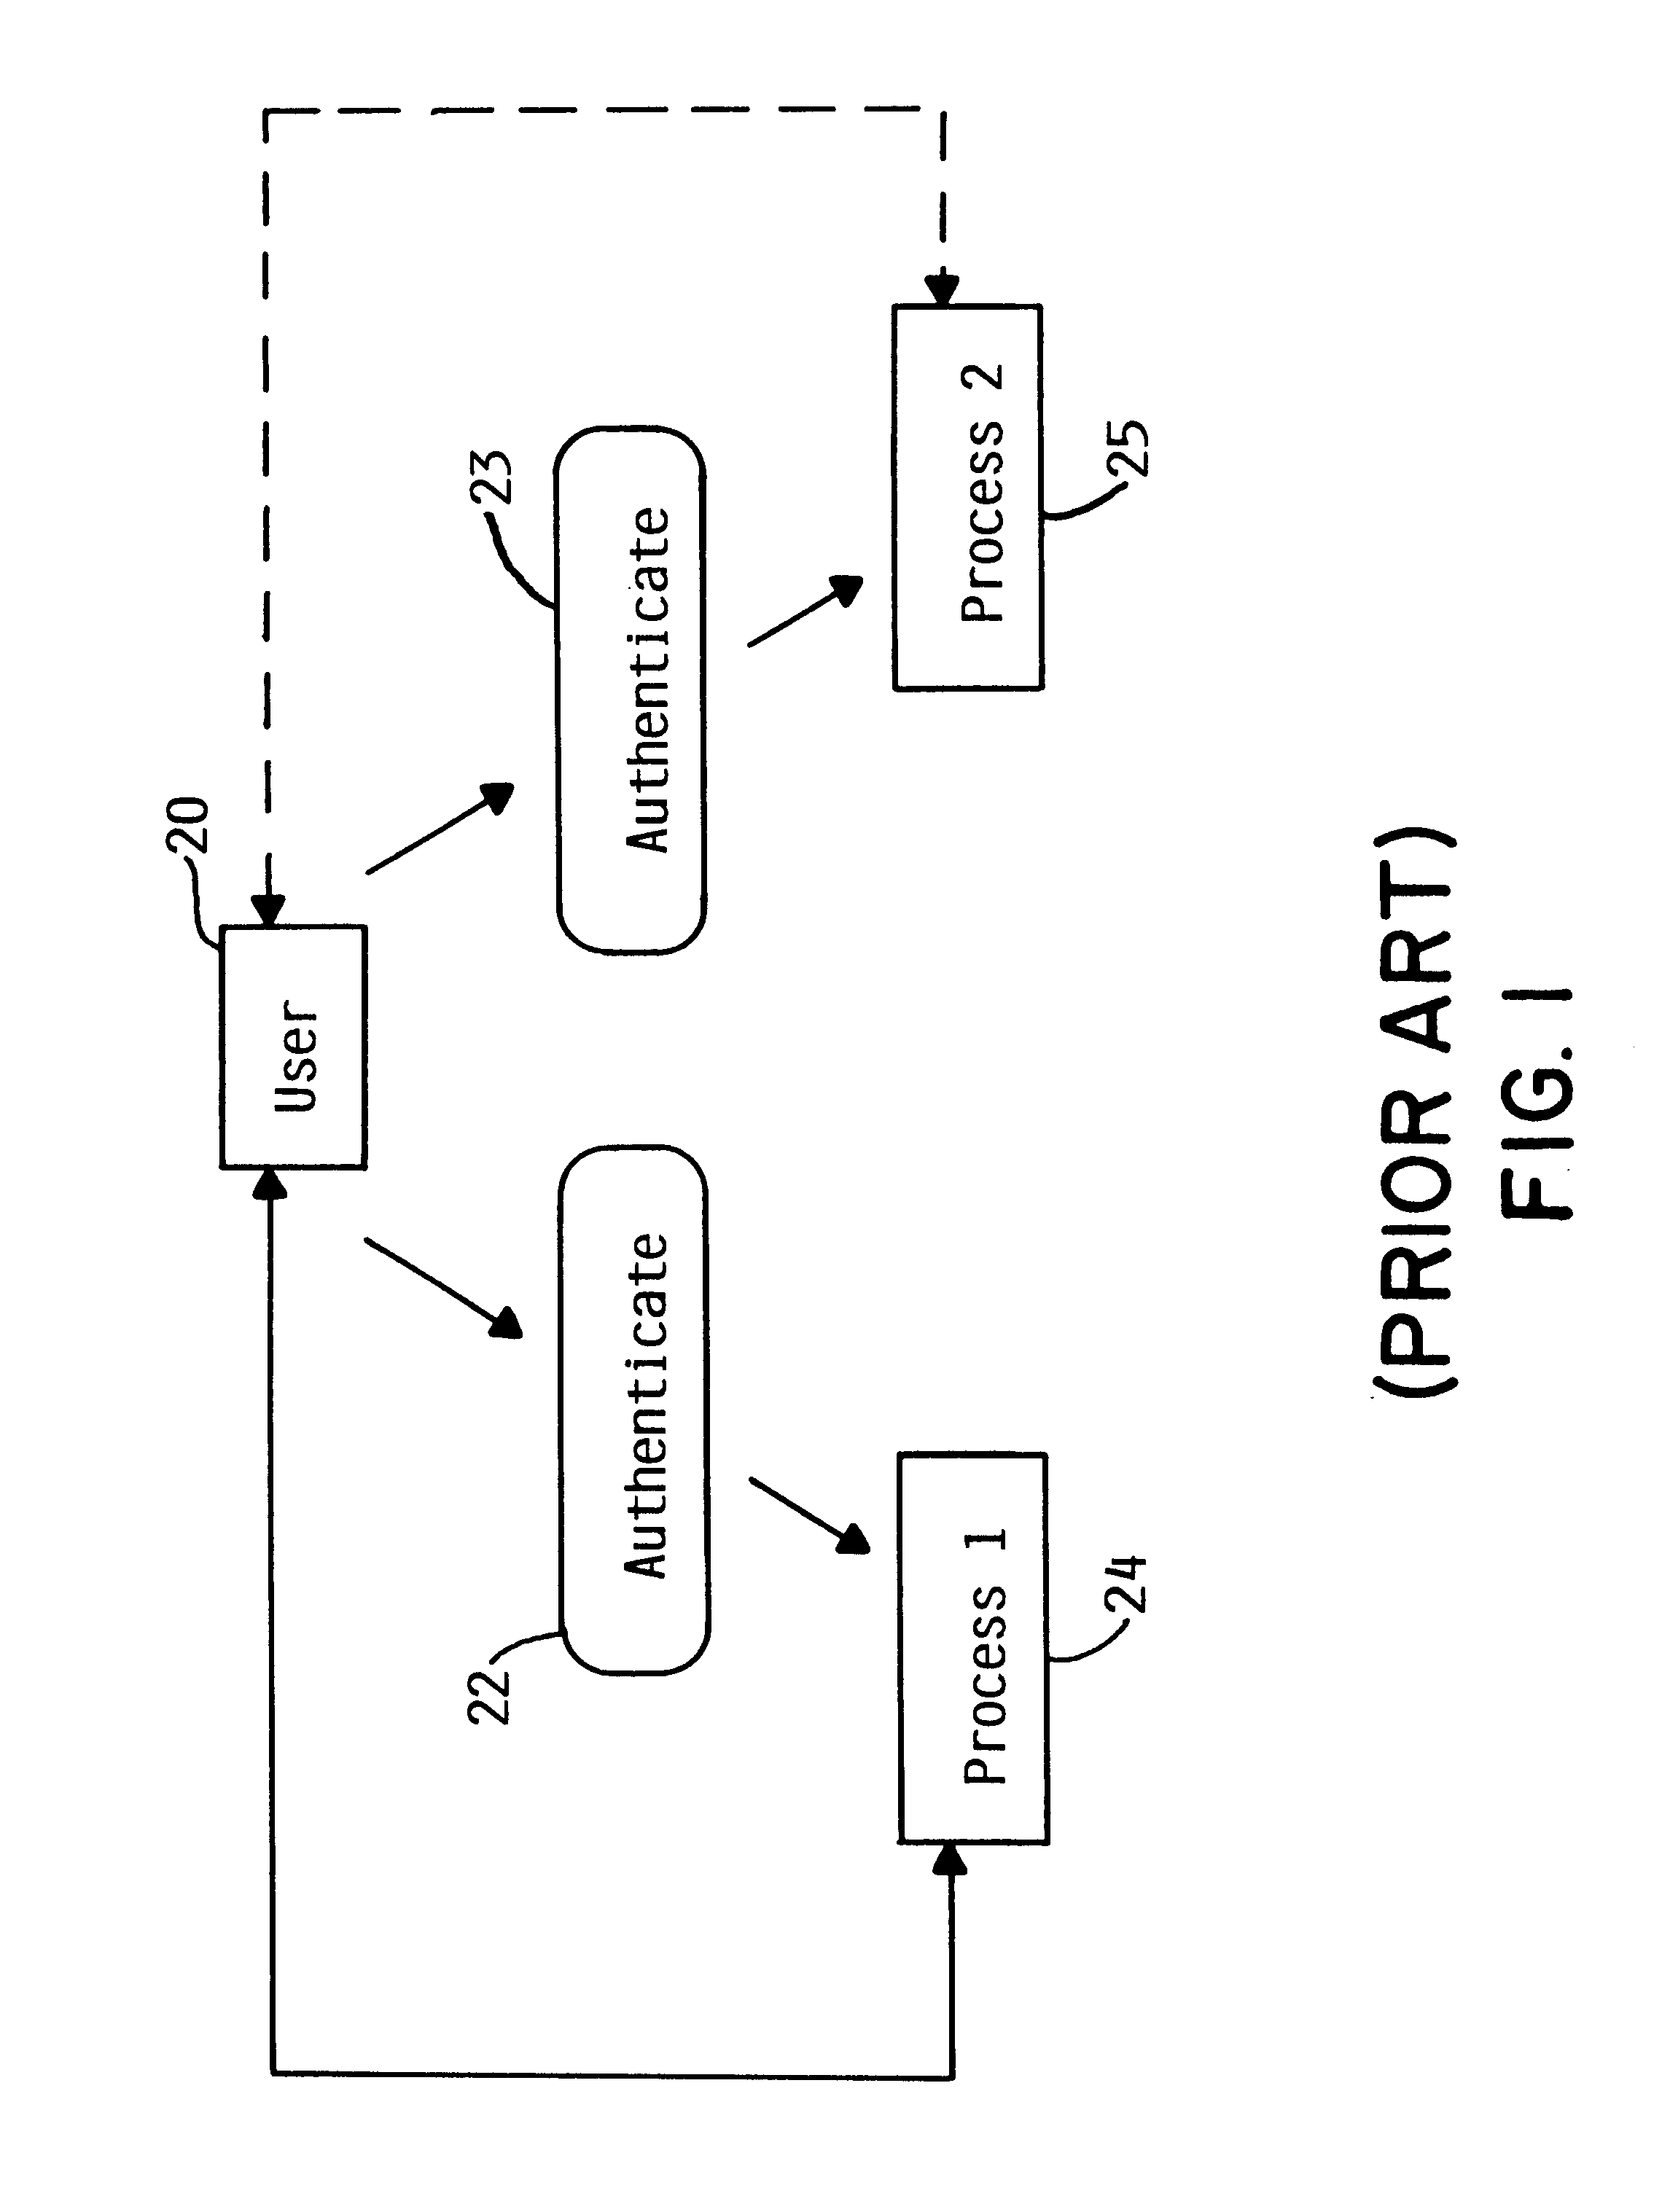 User authentication system and method for multiple process applications